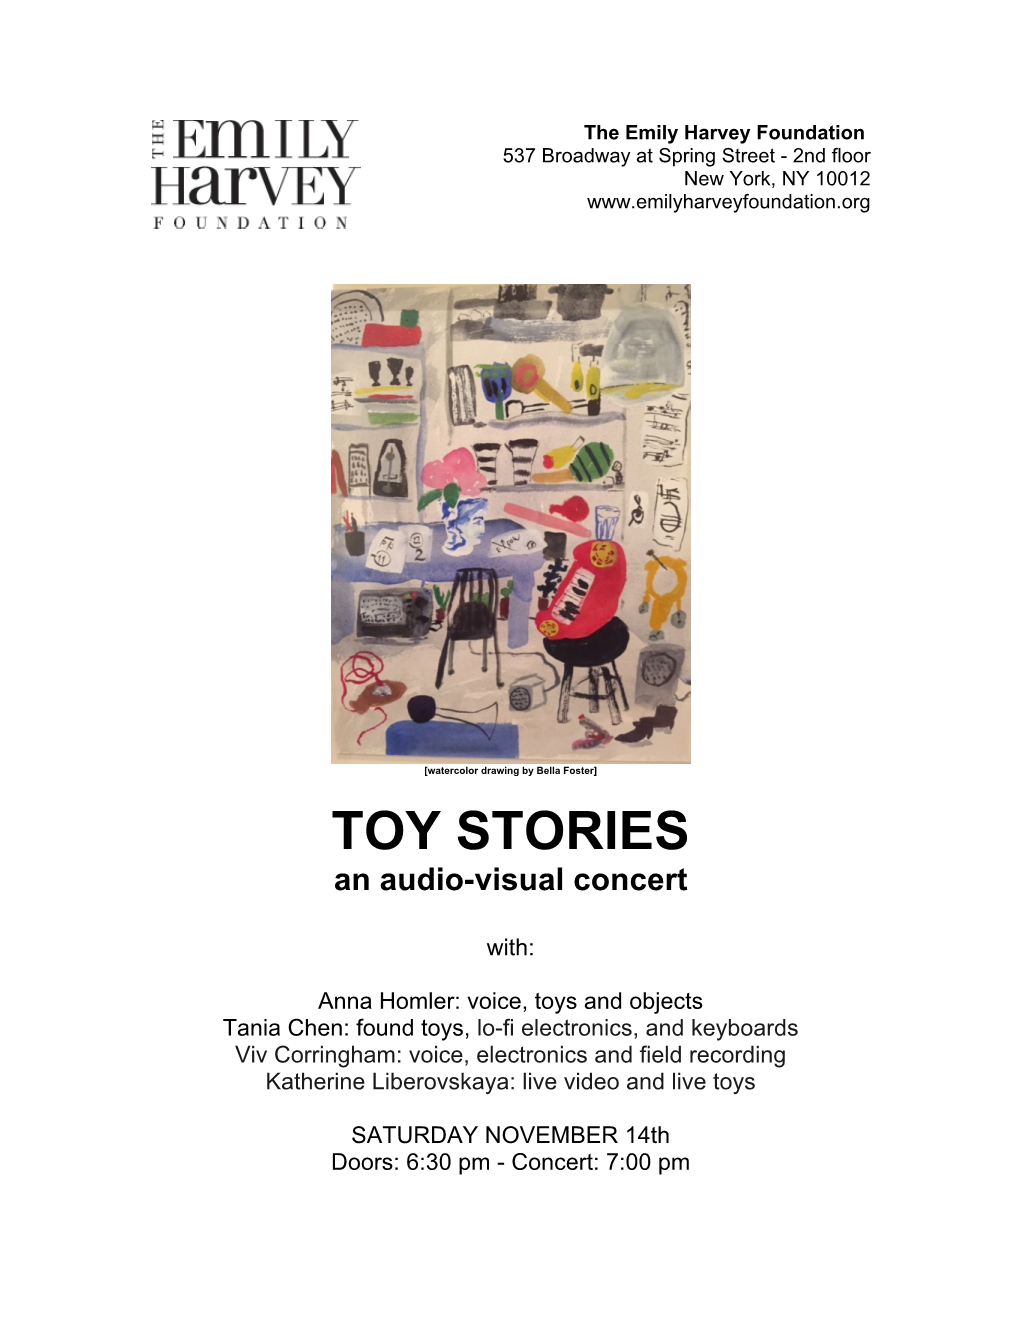 TOY STORIES an Audio-Visual Concert